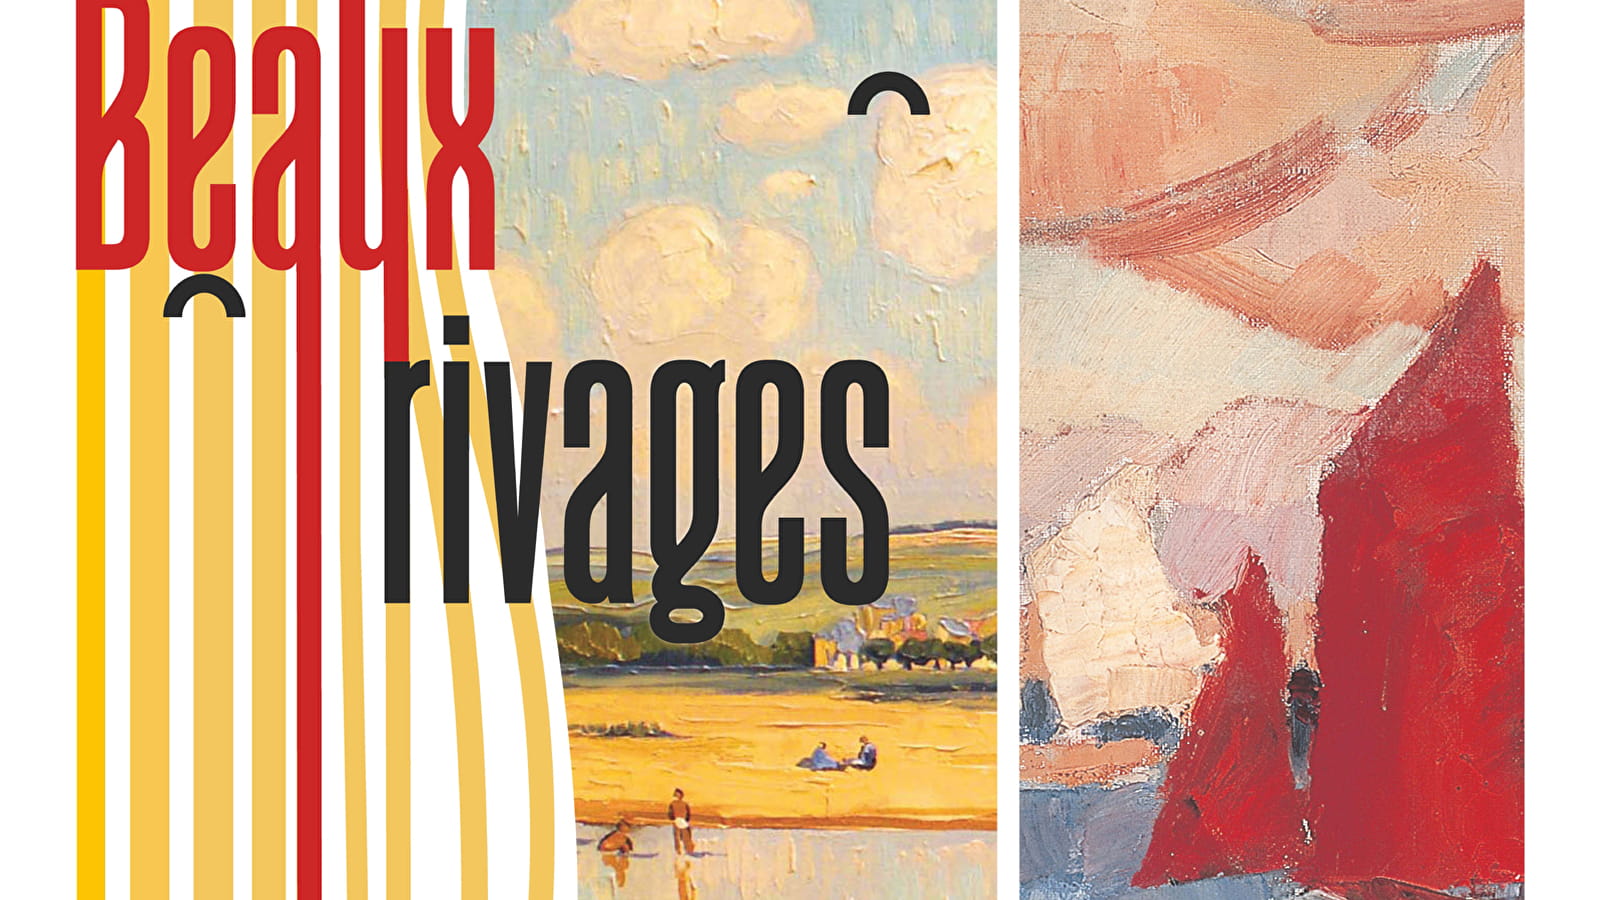 Exposition : Beaux rivages